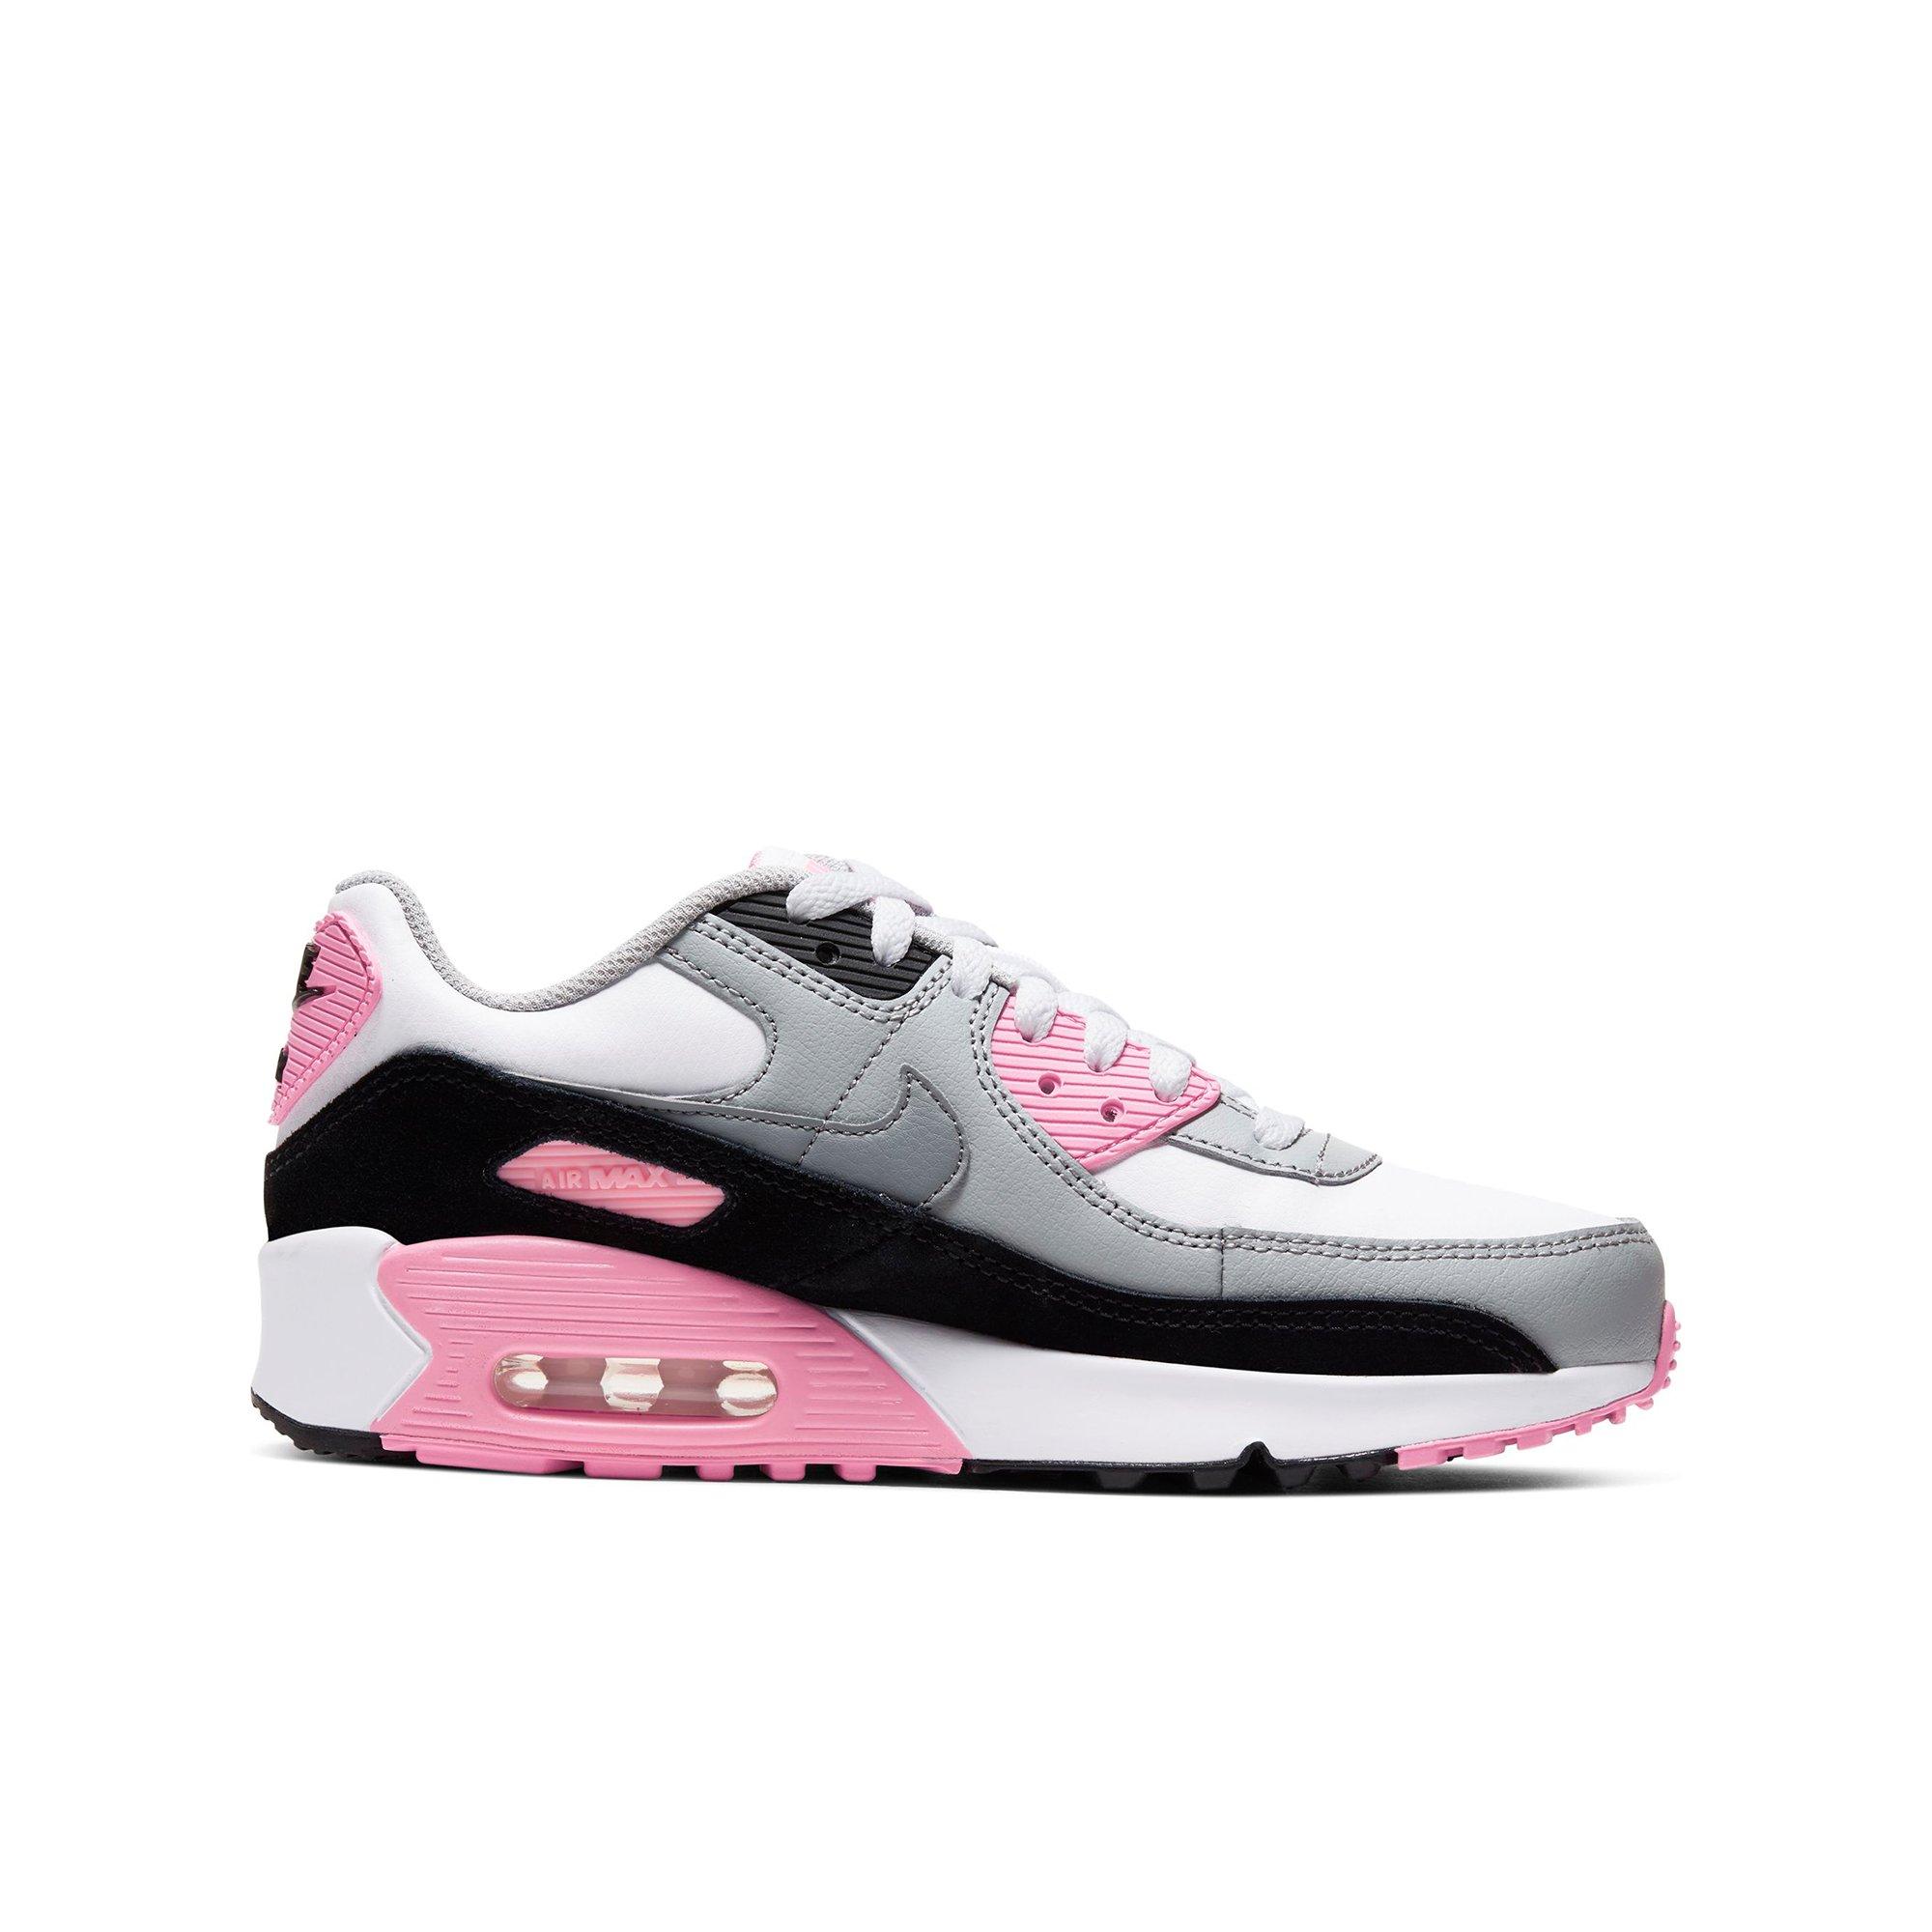 Nike Air Max 90 LTR Td Unisex Babies Sneakers Amazon